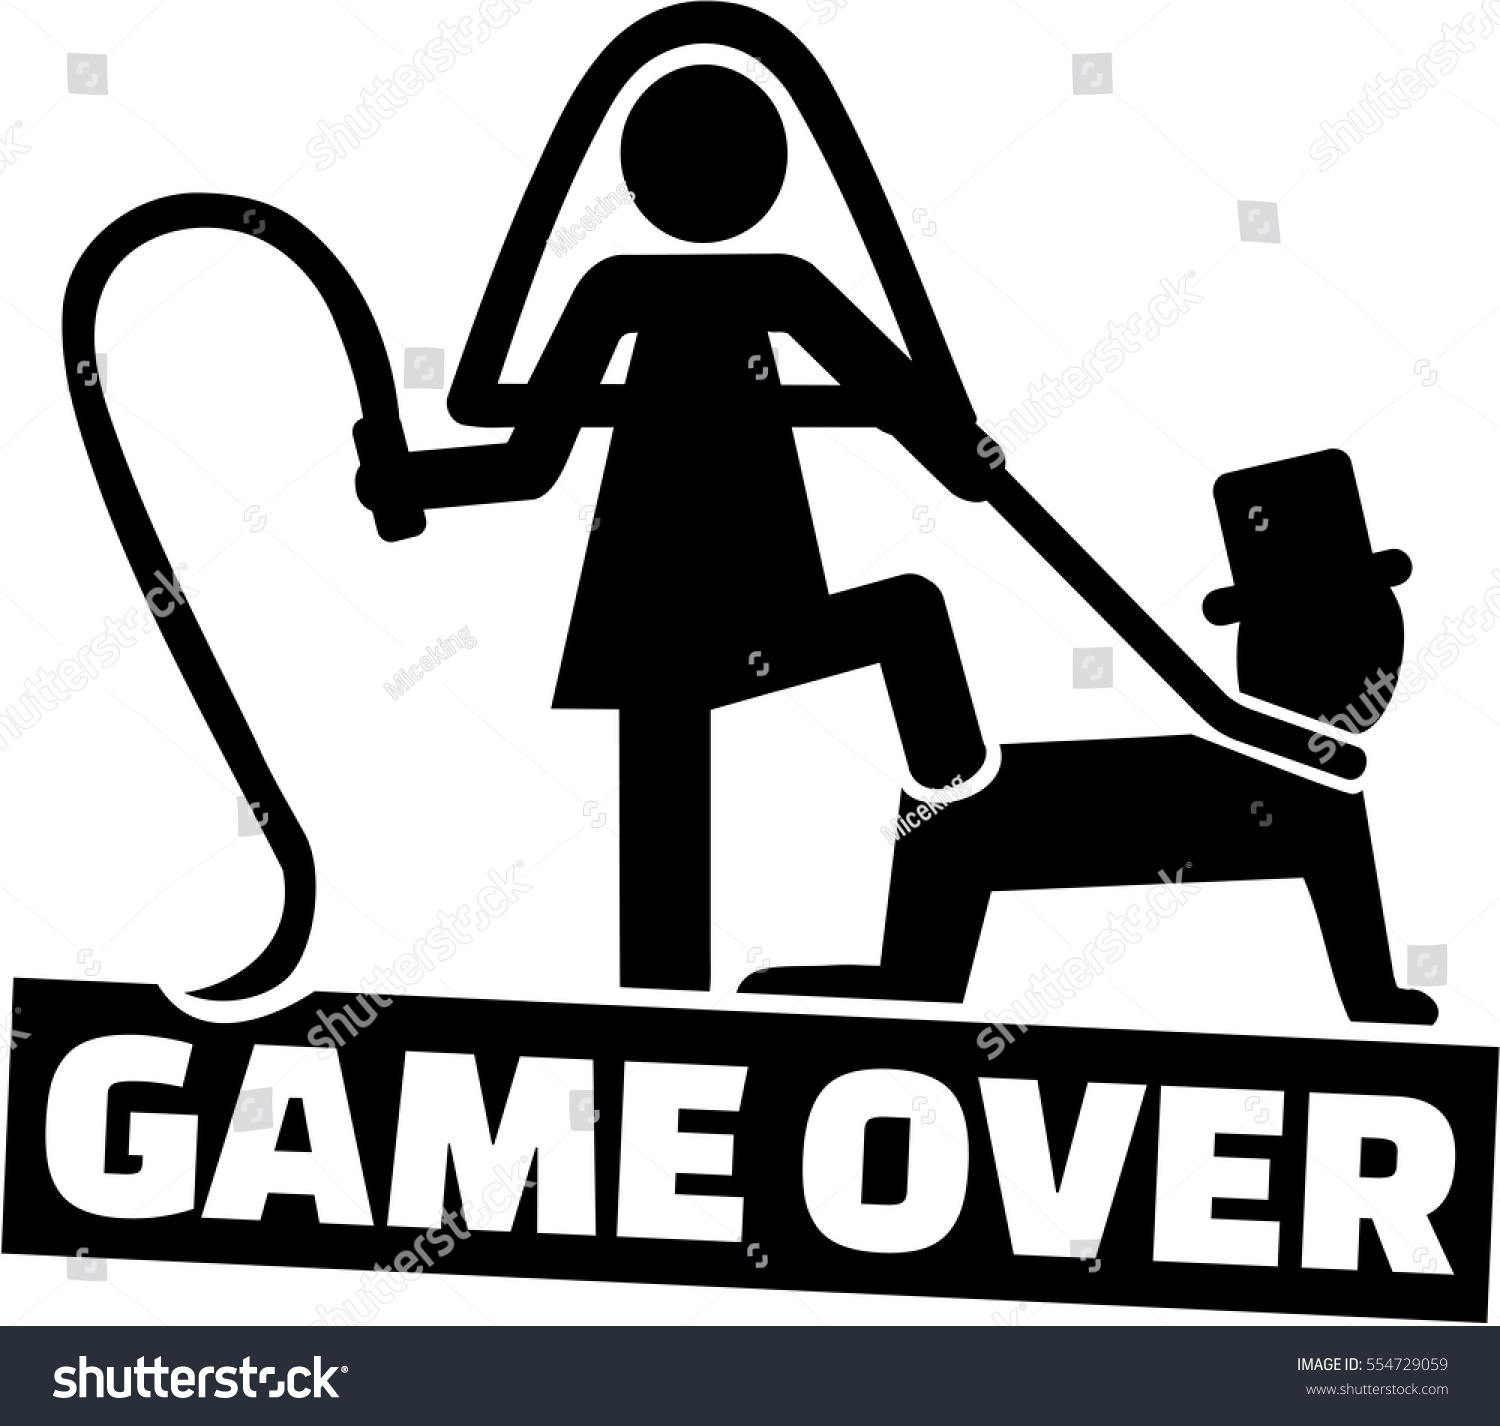 game over clipart - photo #20